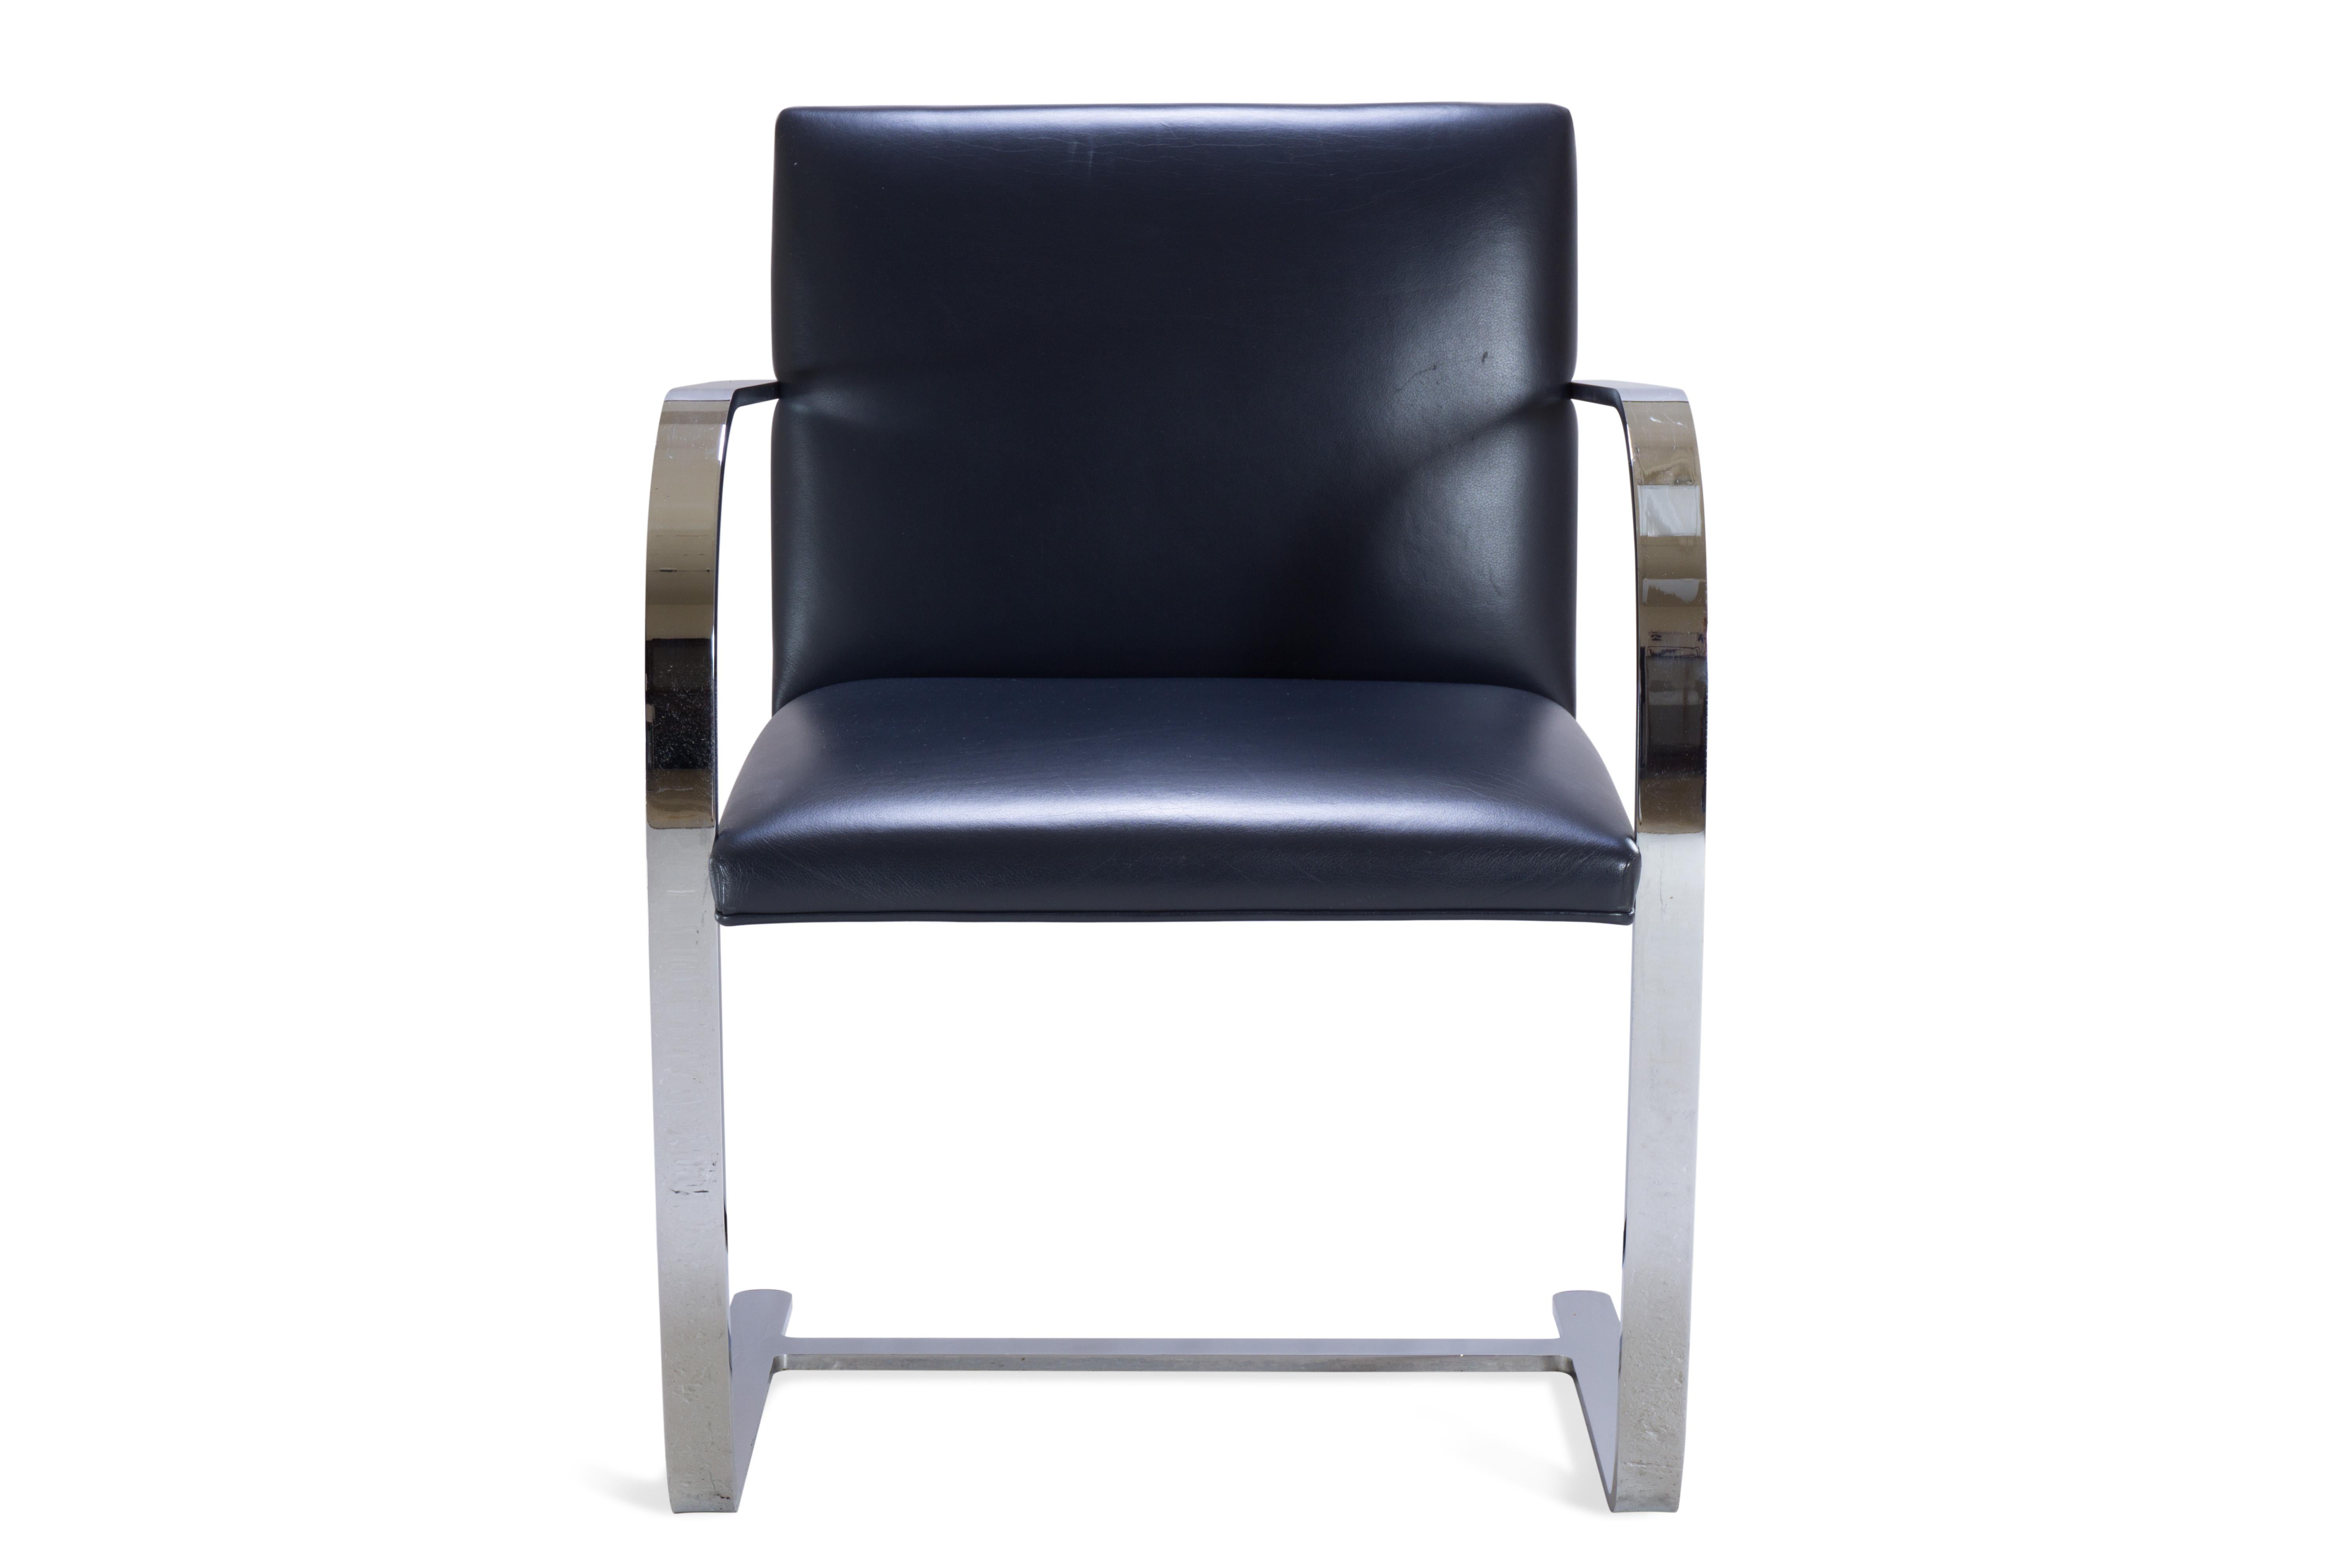 The definition of minimalism in a singular design, achieved by the great Ludwig Mies van der Rohe in 1929, the Brno flat-bar chair is just that. These are contemporary edition Mies van der Rohe for Knoll chairs upholstered in classic original navy